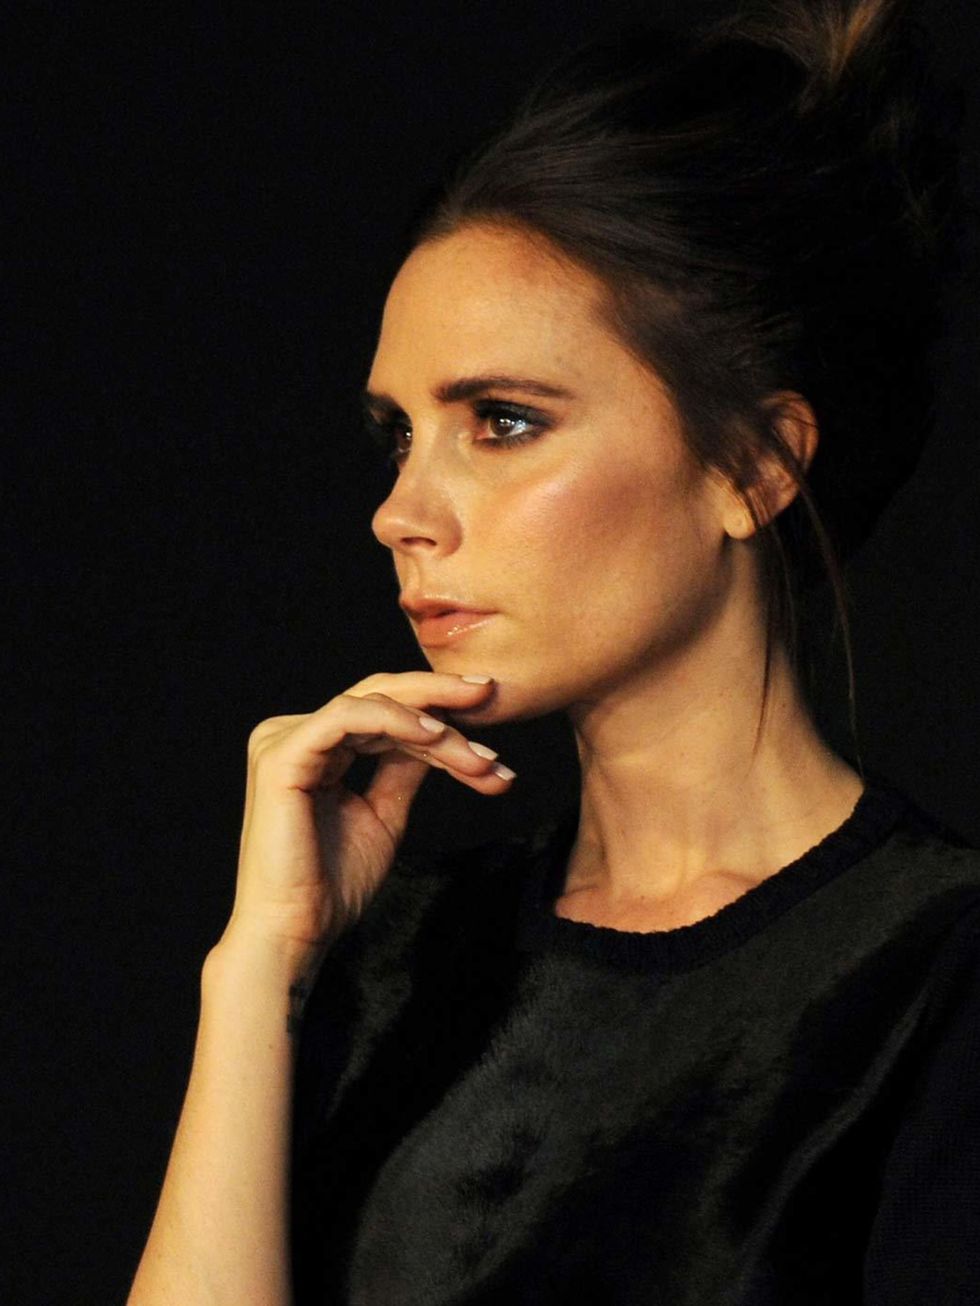 <p><strong>Victoria Beckham</strong></p><p>Yes, the Beckingham Palace era was a little embarrassing but as an idea, definitely worth revisiting.</p><p><a href="http://www.elleuk.com/fashion/news/victoria-victoria-beckham-autumn-winter-2013-review">Victori